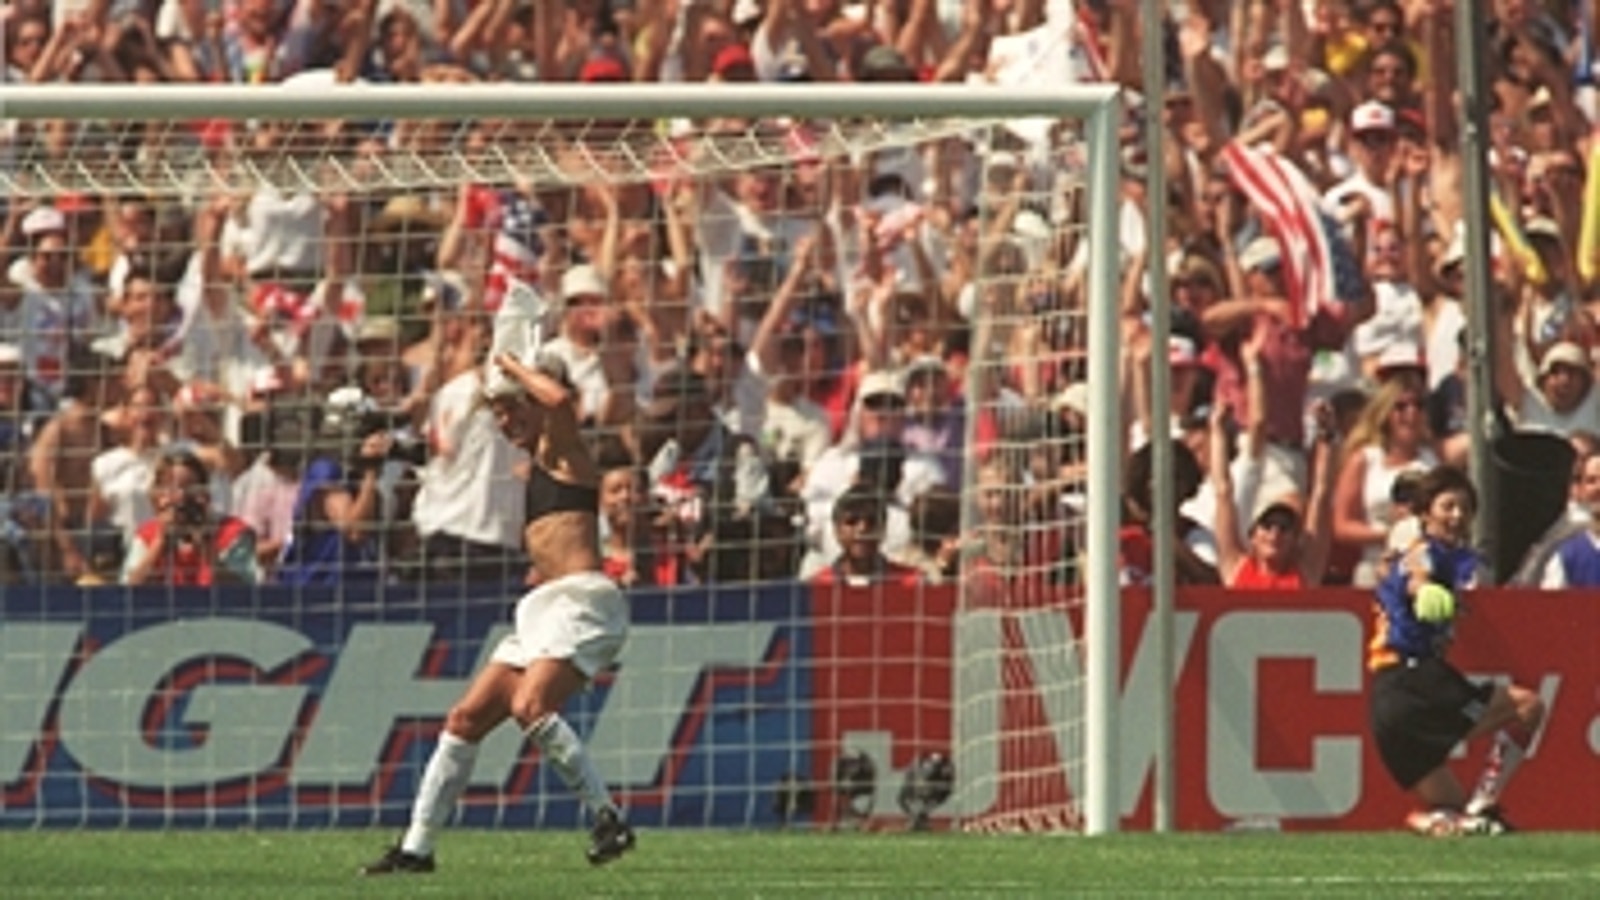 Brandi Chastain relives her penalty, the greatest Women's World Cup moment ever